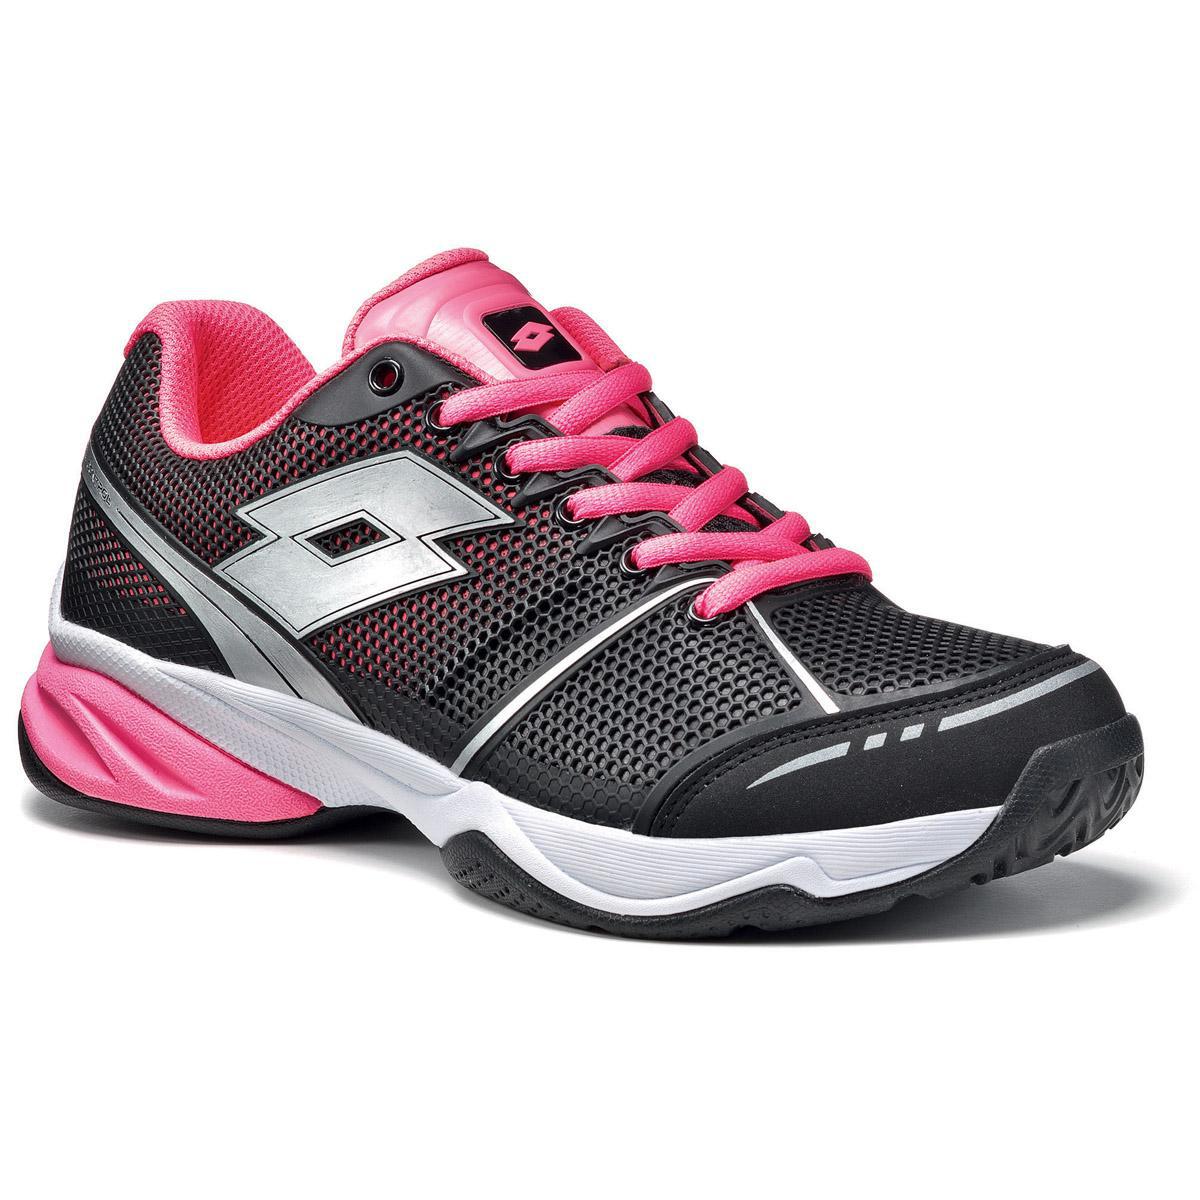 Lotto Womens Viper Ultra Tennis Shoes Black/Fluo Pink